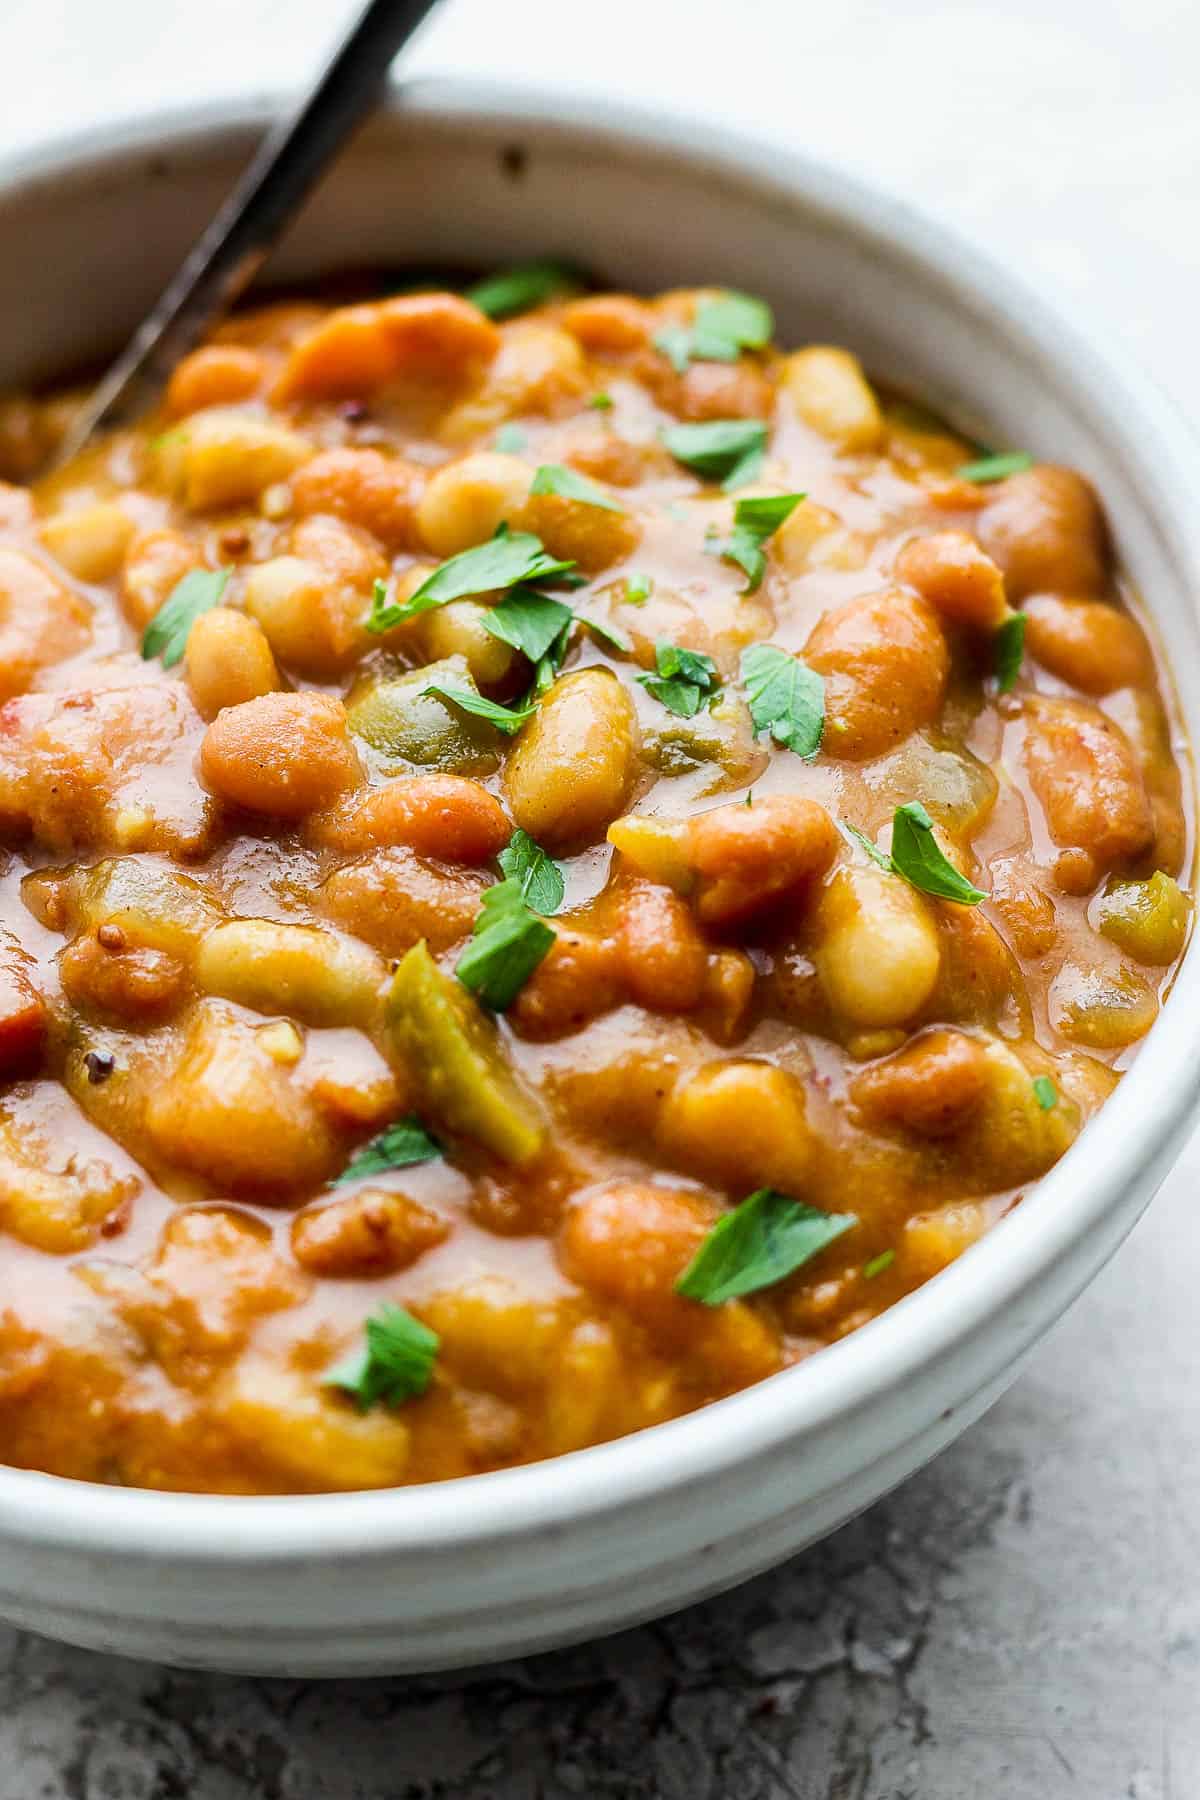 Slow cooker baked beans in a bowl with a spoon.